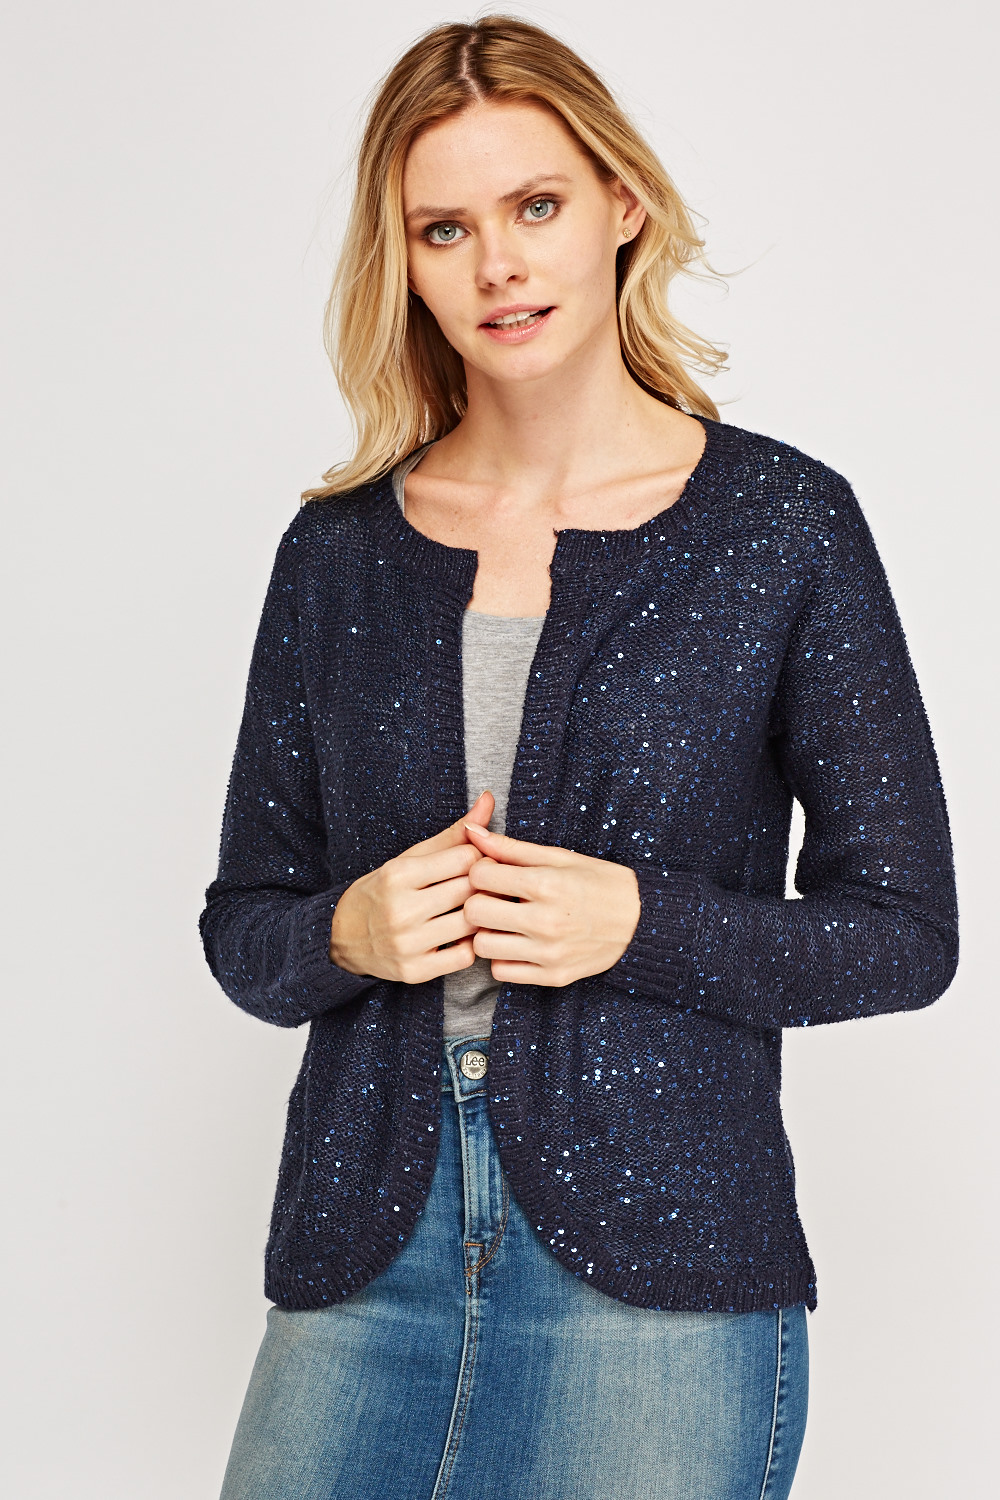 Sequin Knitted Cardigan  Just 7